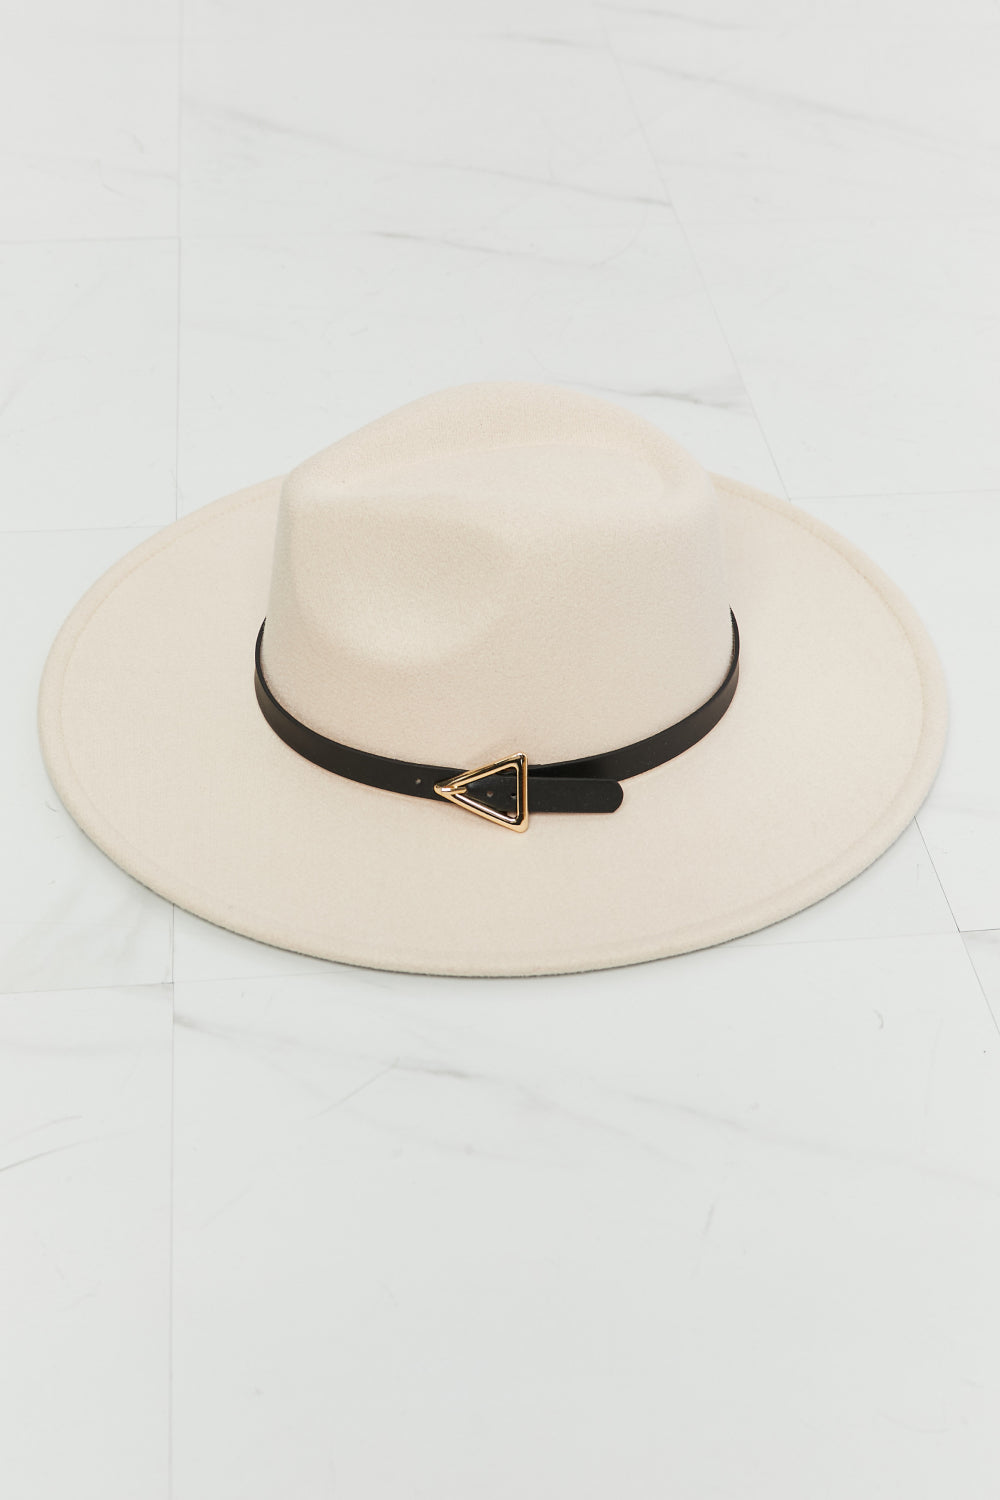 Fame Ride Along Fedora Hat Print on any thing USA/STOD clothes